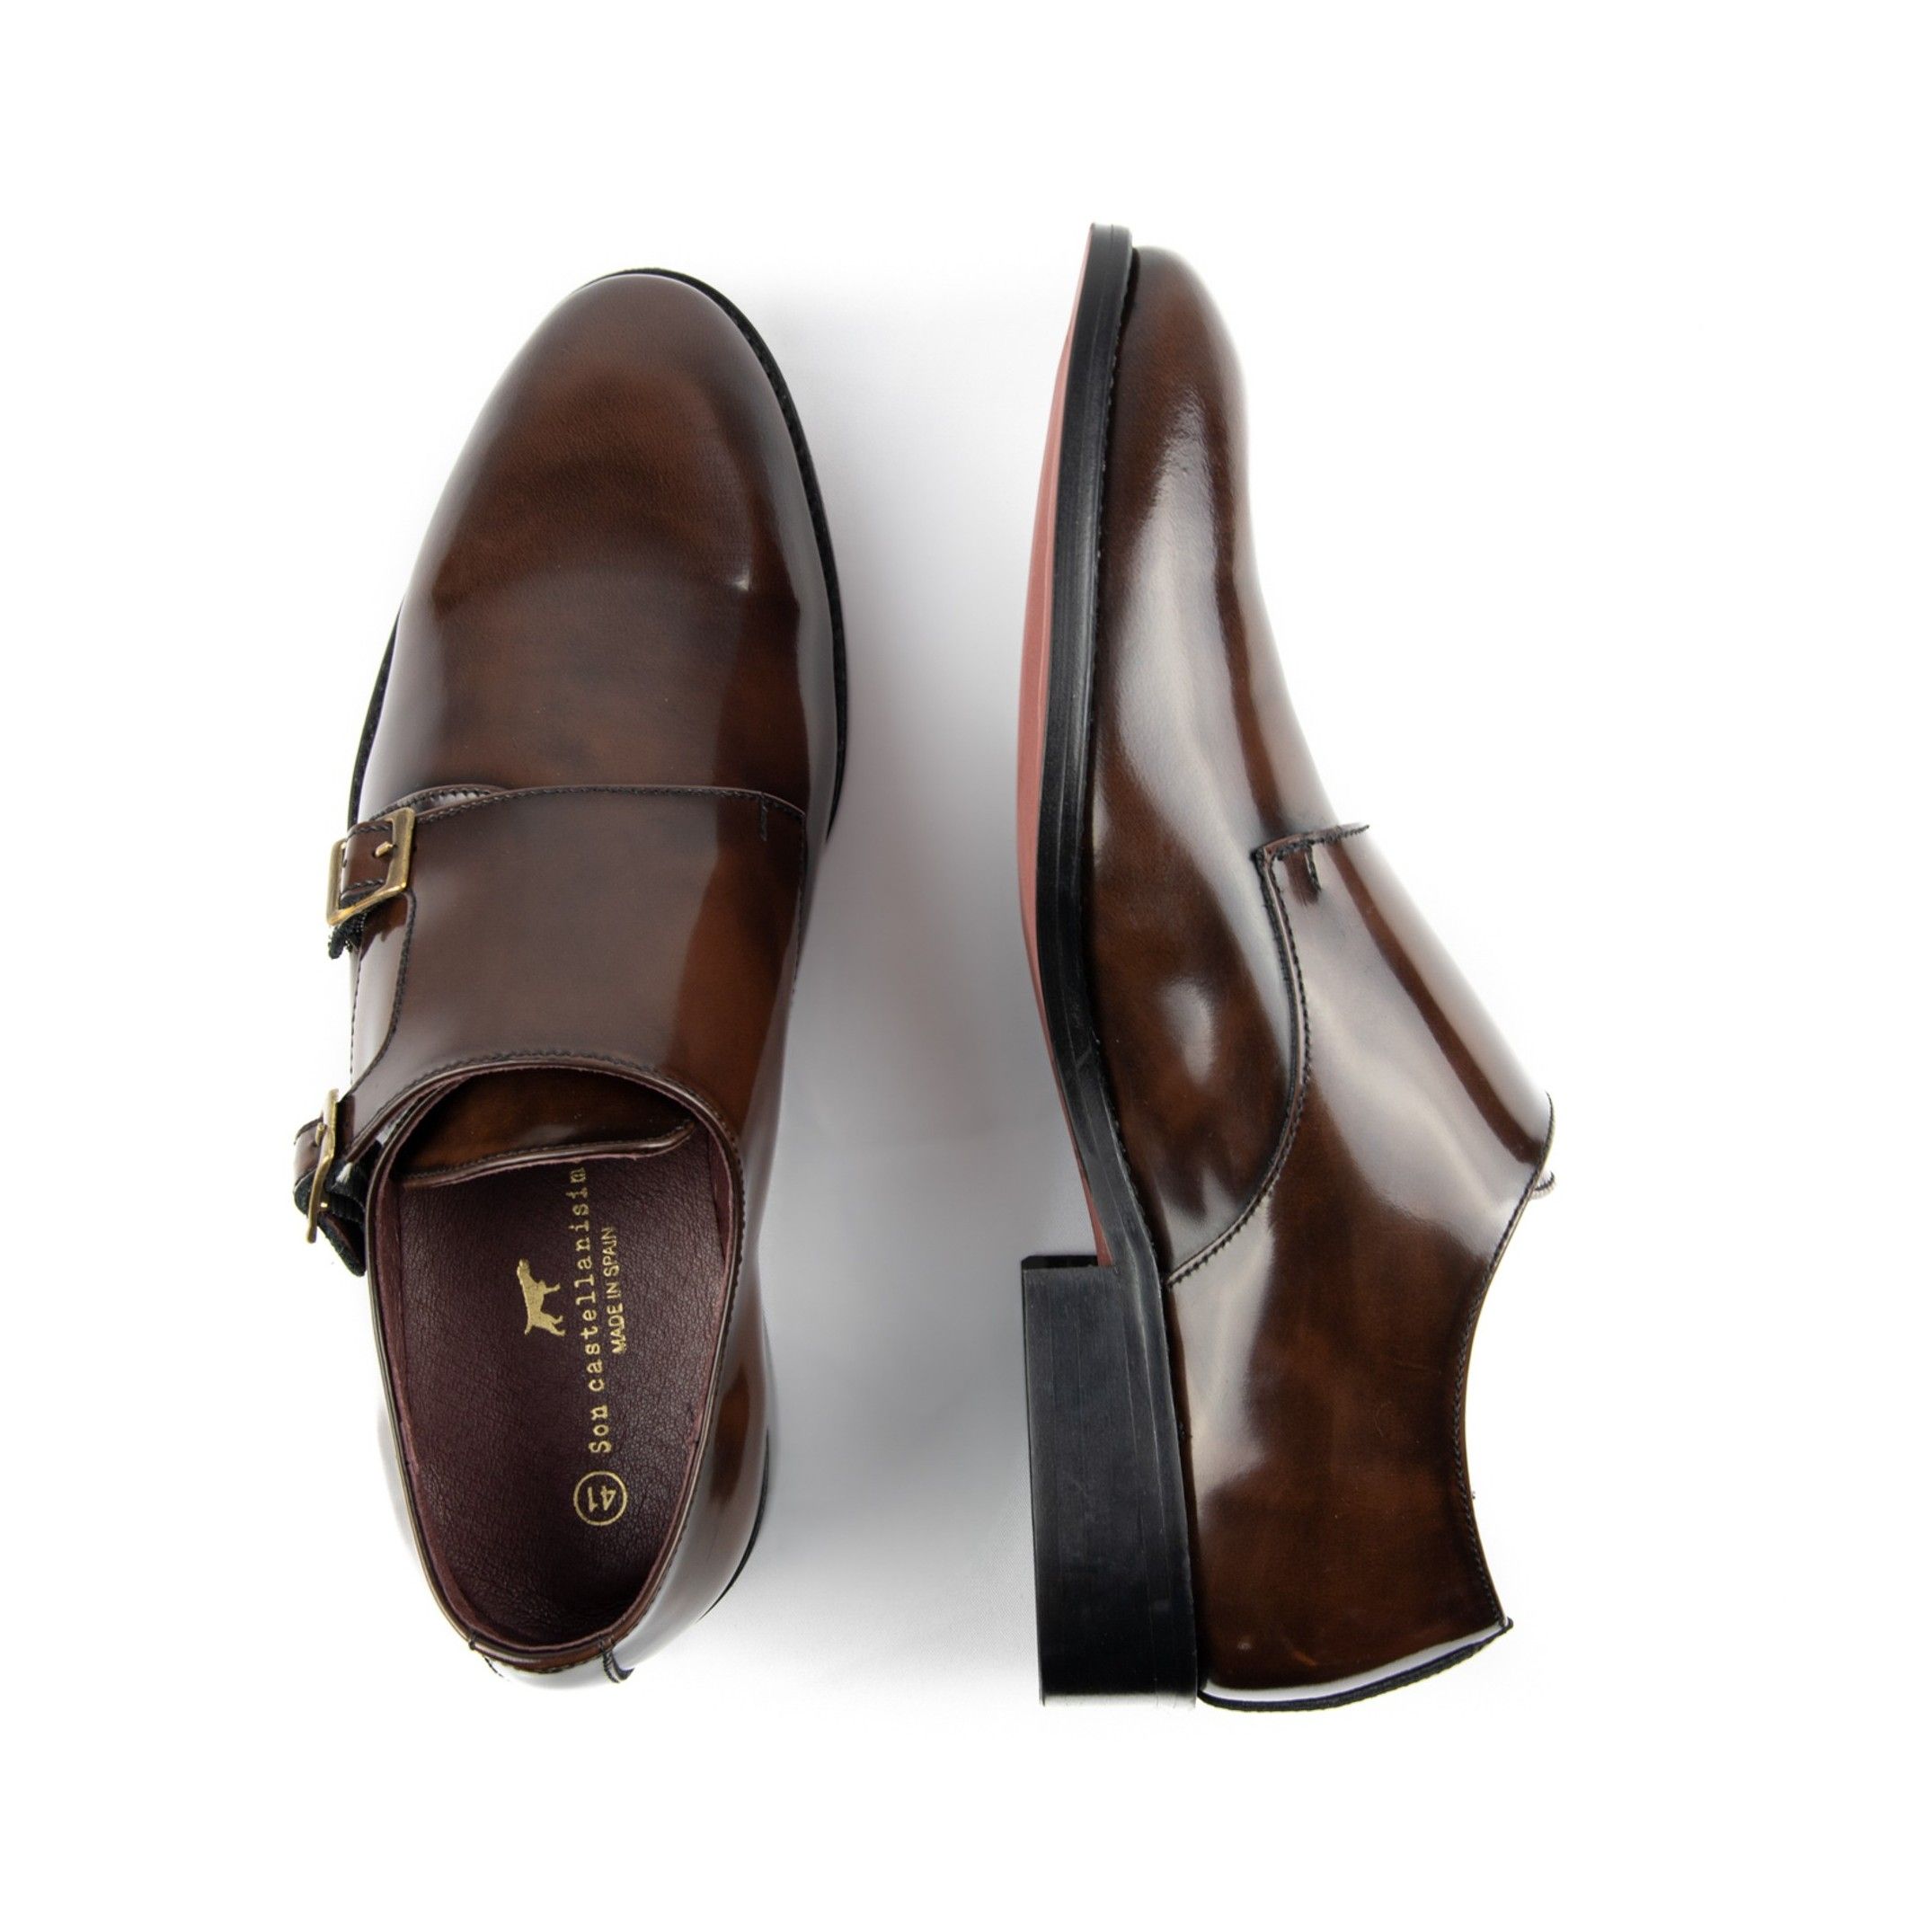 Monkstrap shoes in florentic leather. Closure: metalic buckle. Upper: florentic leather. Inner: leather. insole: leather. Sole: Synthetic leather (better in durability and waterproofness). MADE IN SPAIN.